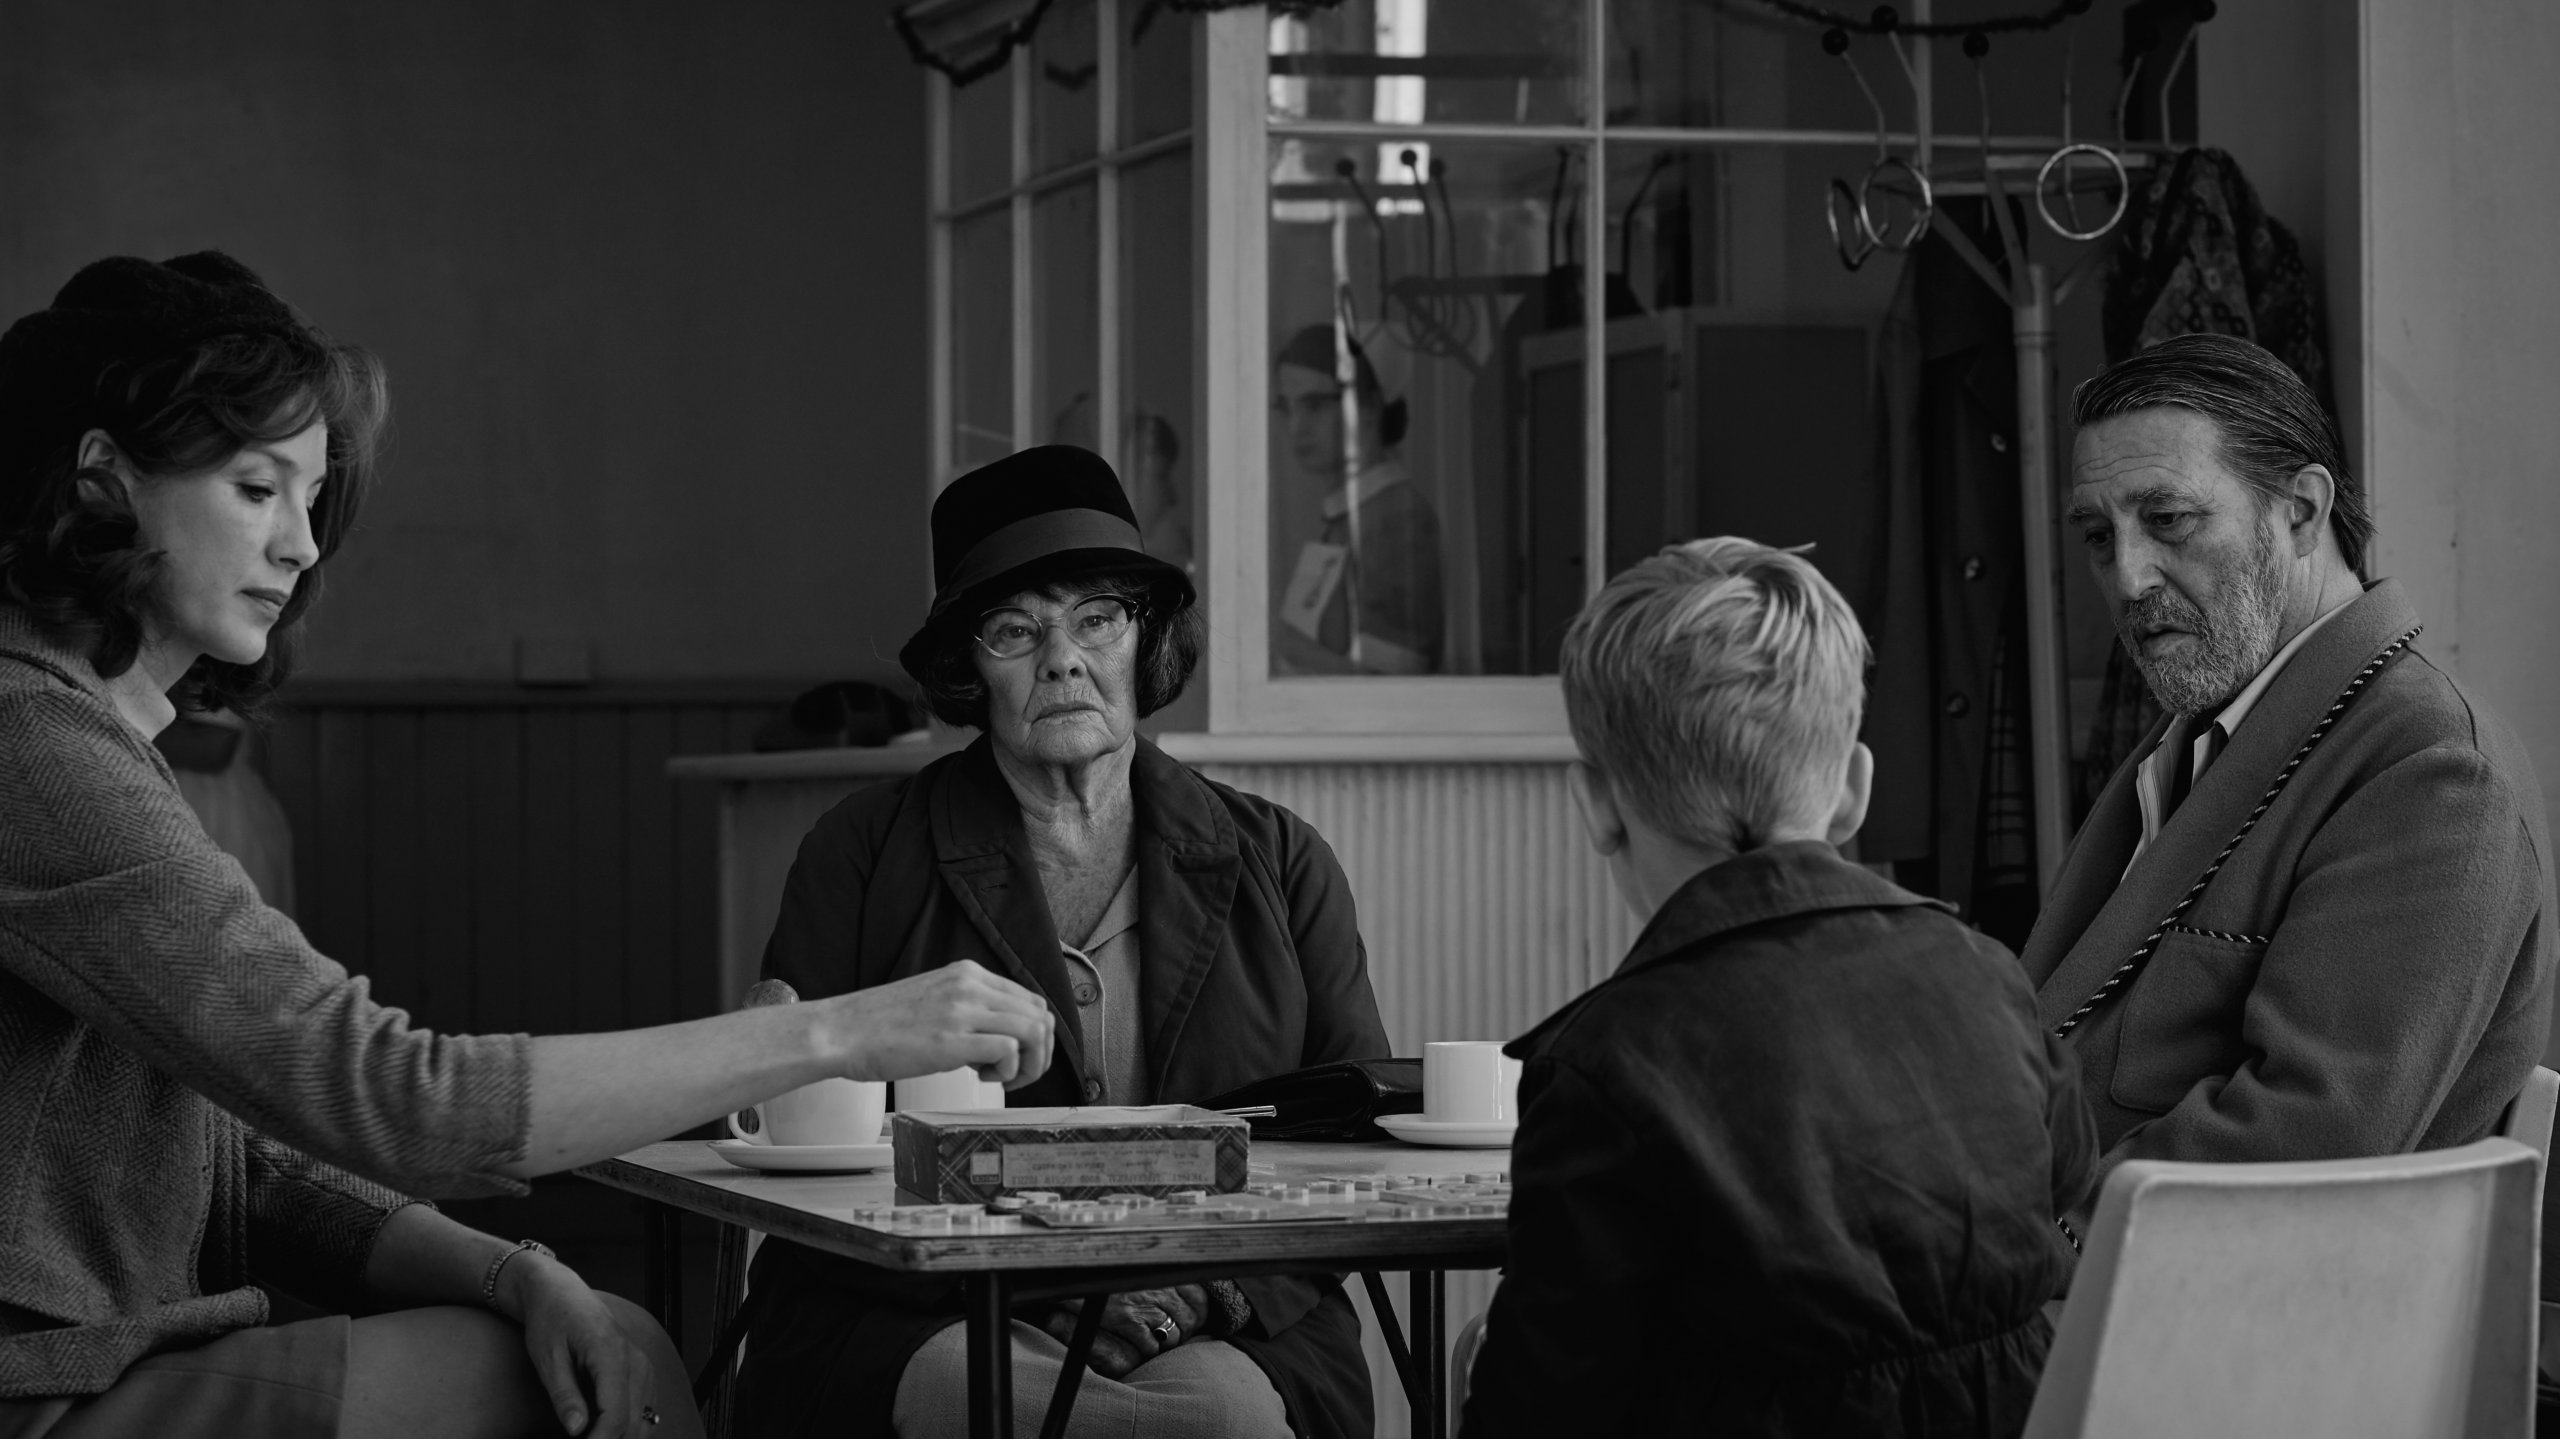 (L to R) Caitriona Balfe as "Ma", Judi Dench as "Granny", Jude Hill as "Buddy", and Ciarán Hinds as "Pop" in director Kenneth Branagh's "Belfast"